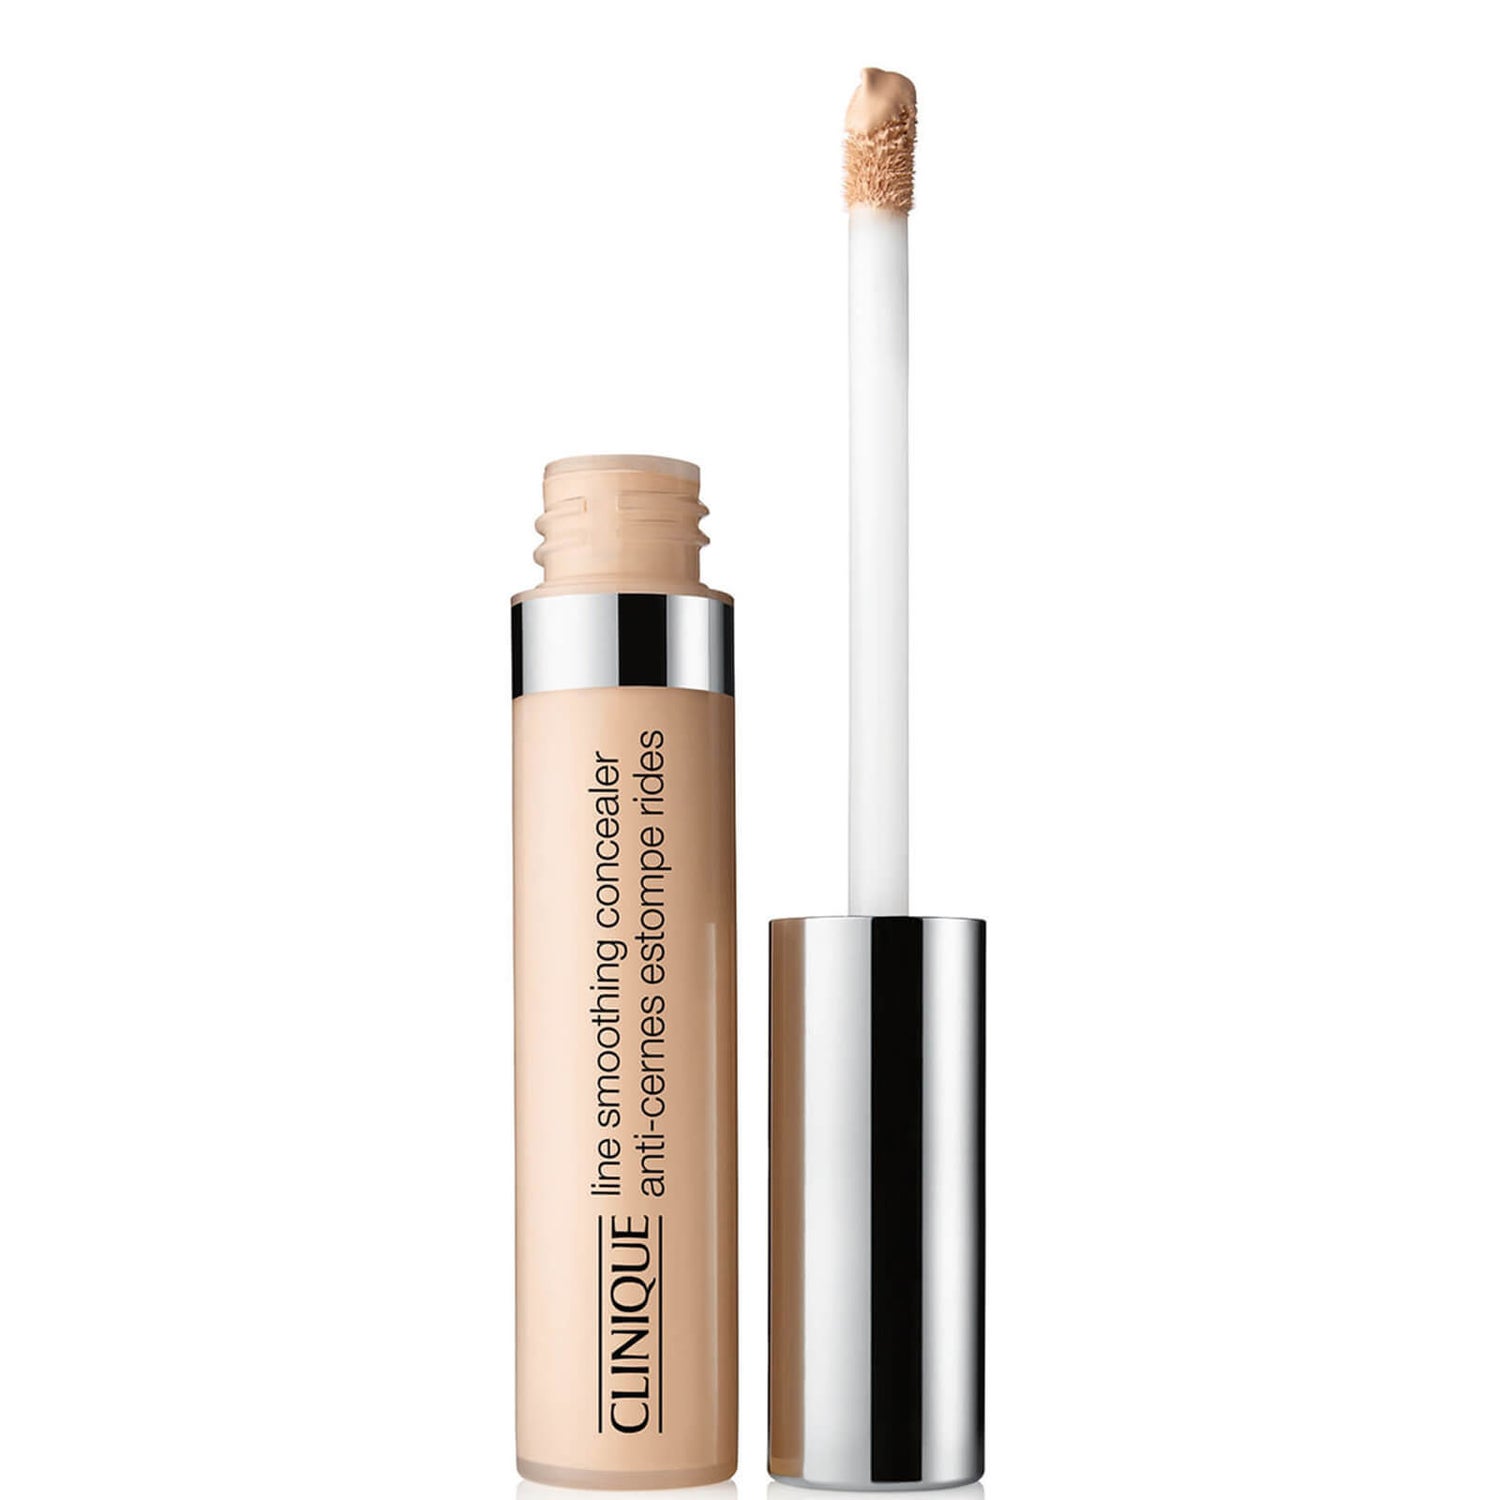 Clinique Line Smoothing Concealer - Claro